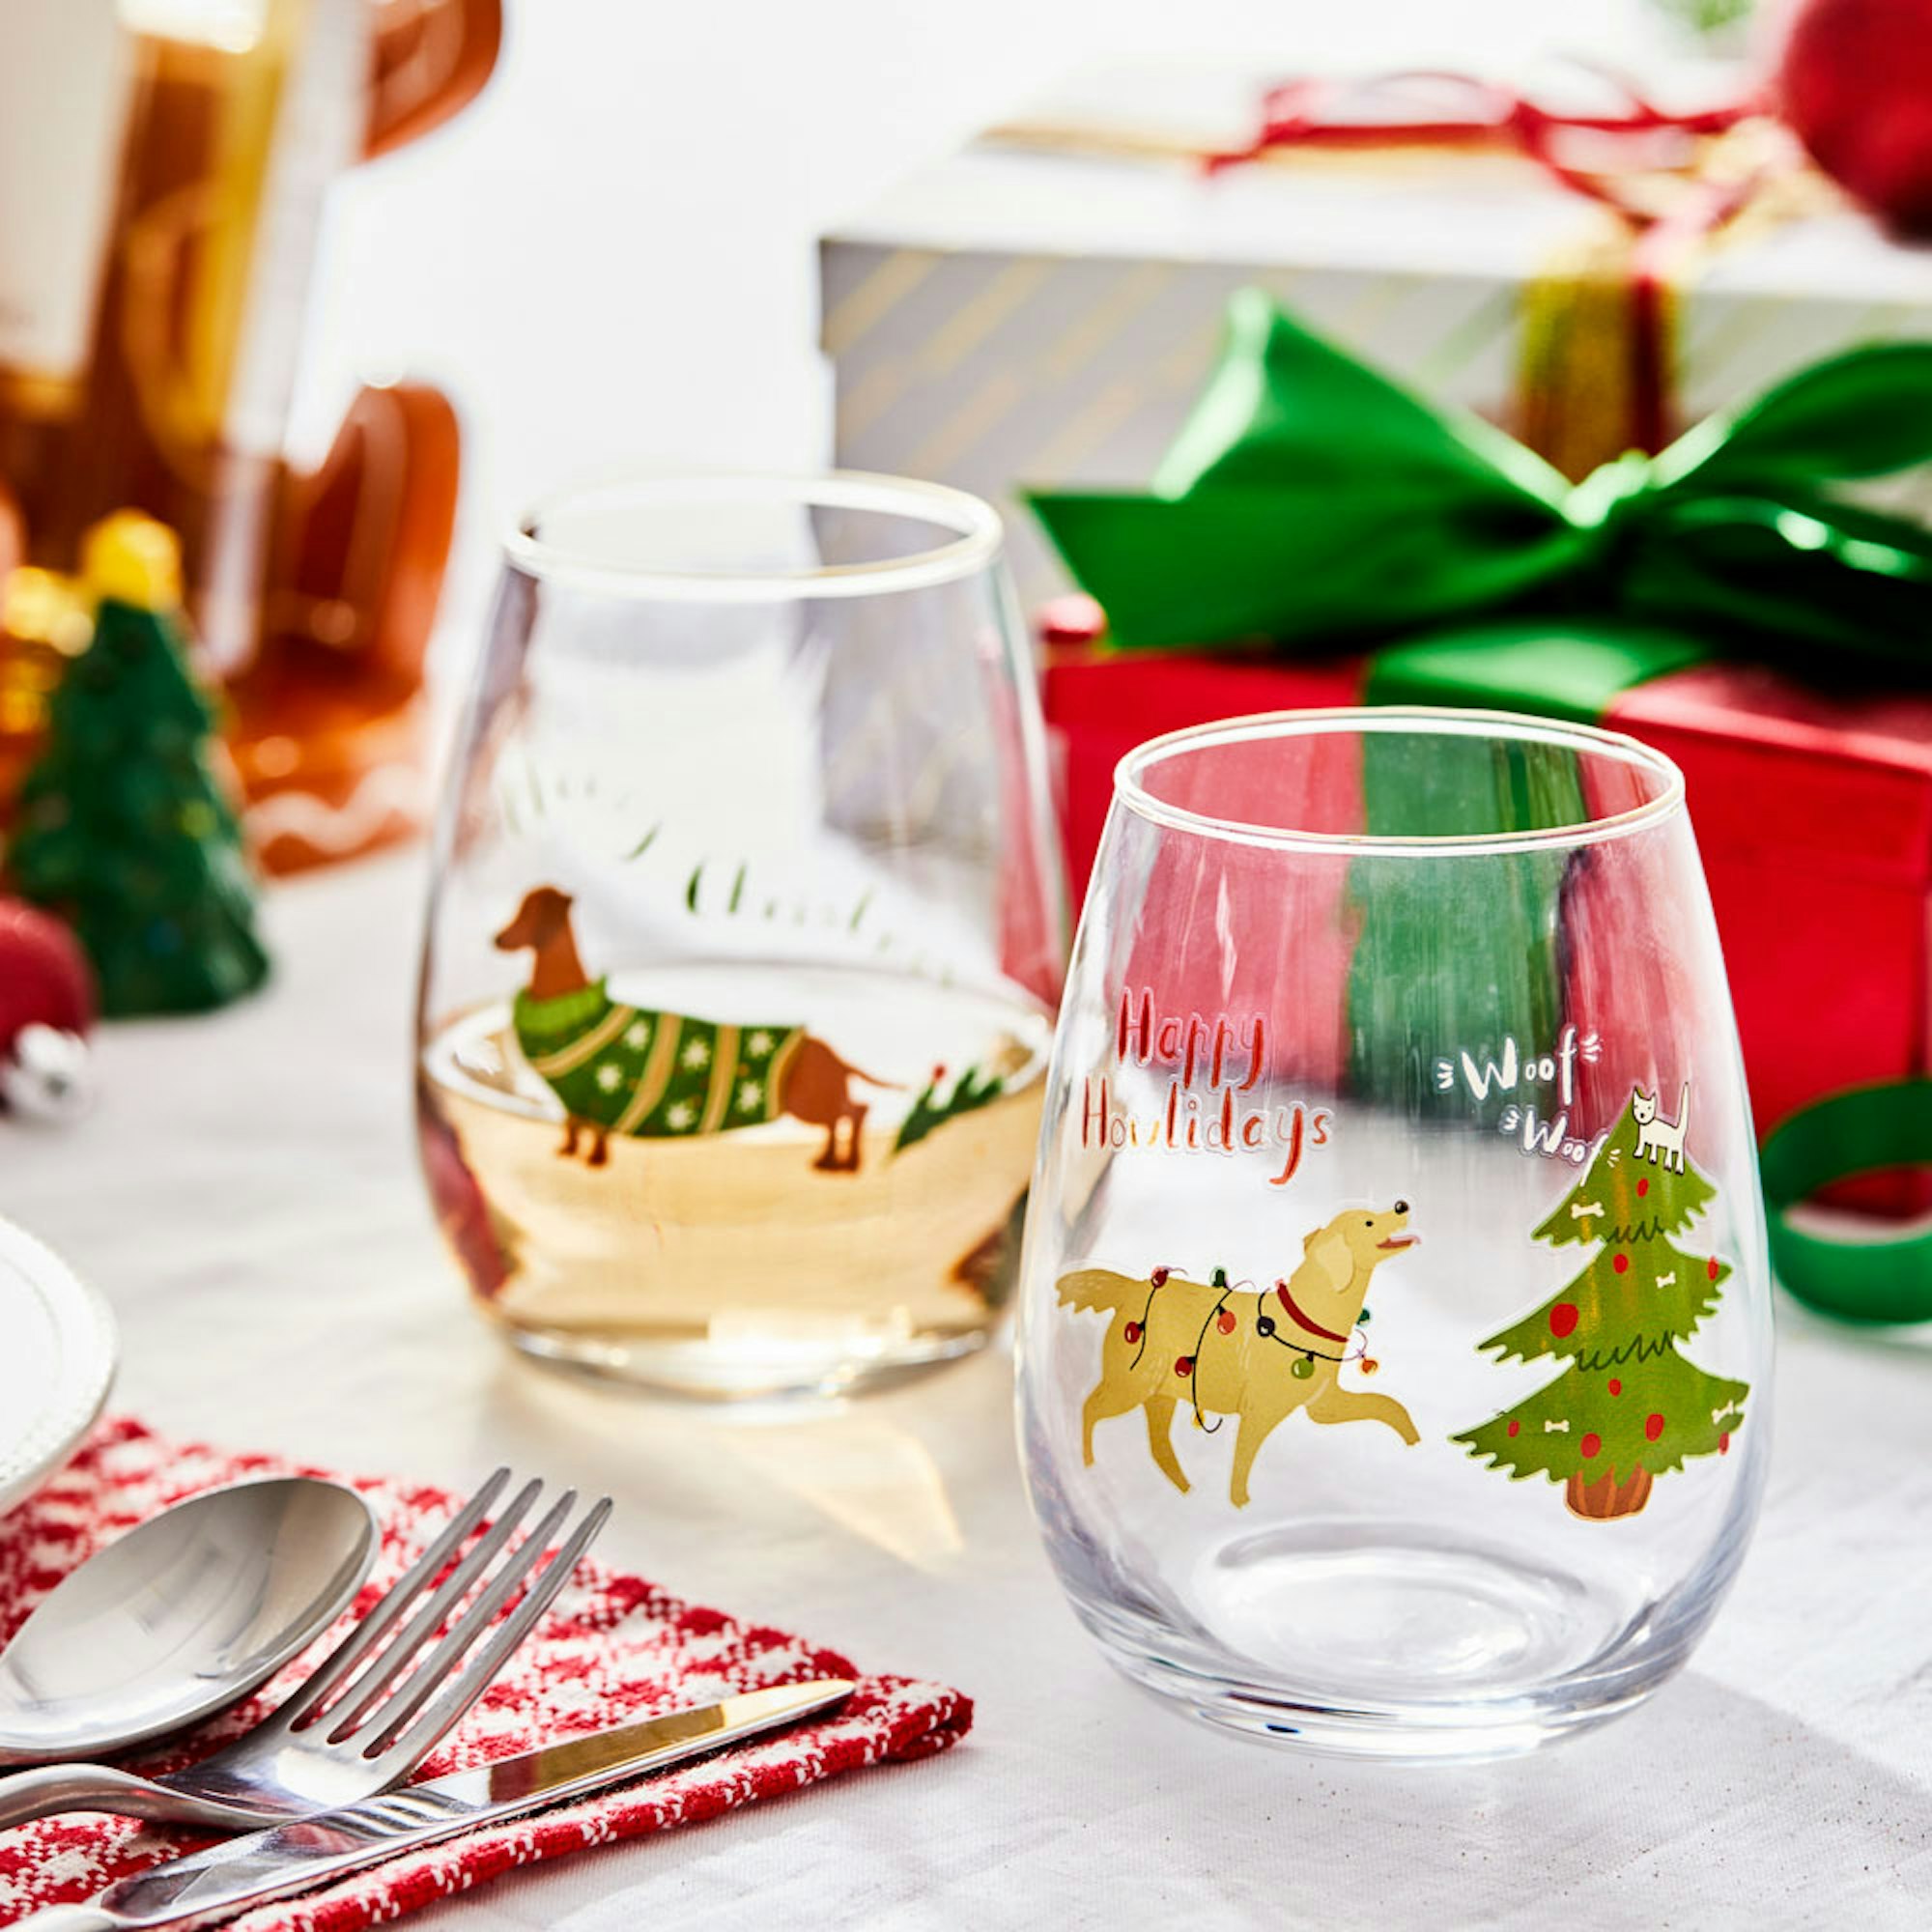 Christmas Gift Guide. Secret Santa Gifts. Two Christmas stemless wine glasses with presents in the background.